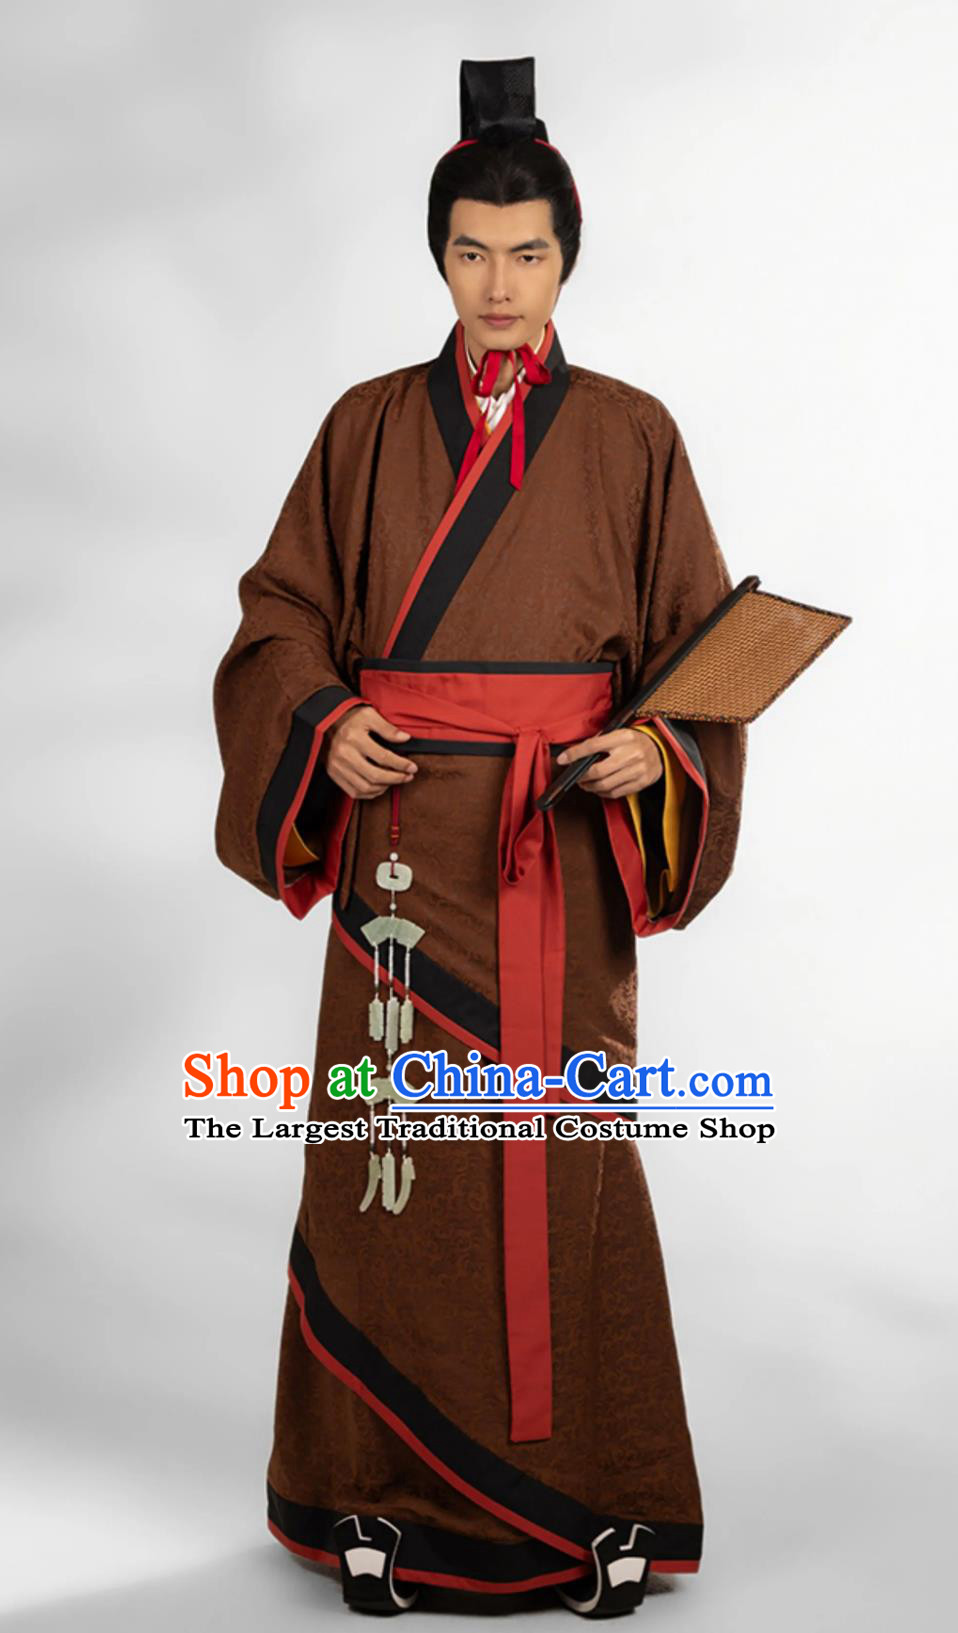 China Travel Photography Costume Mens Hanfu Ancient Chinese Scholar Clothing Traditional Qin Dynasty Curving Front Robe